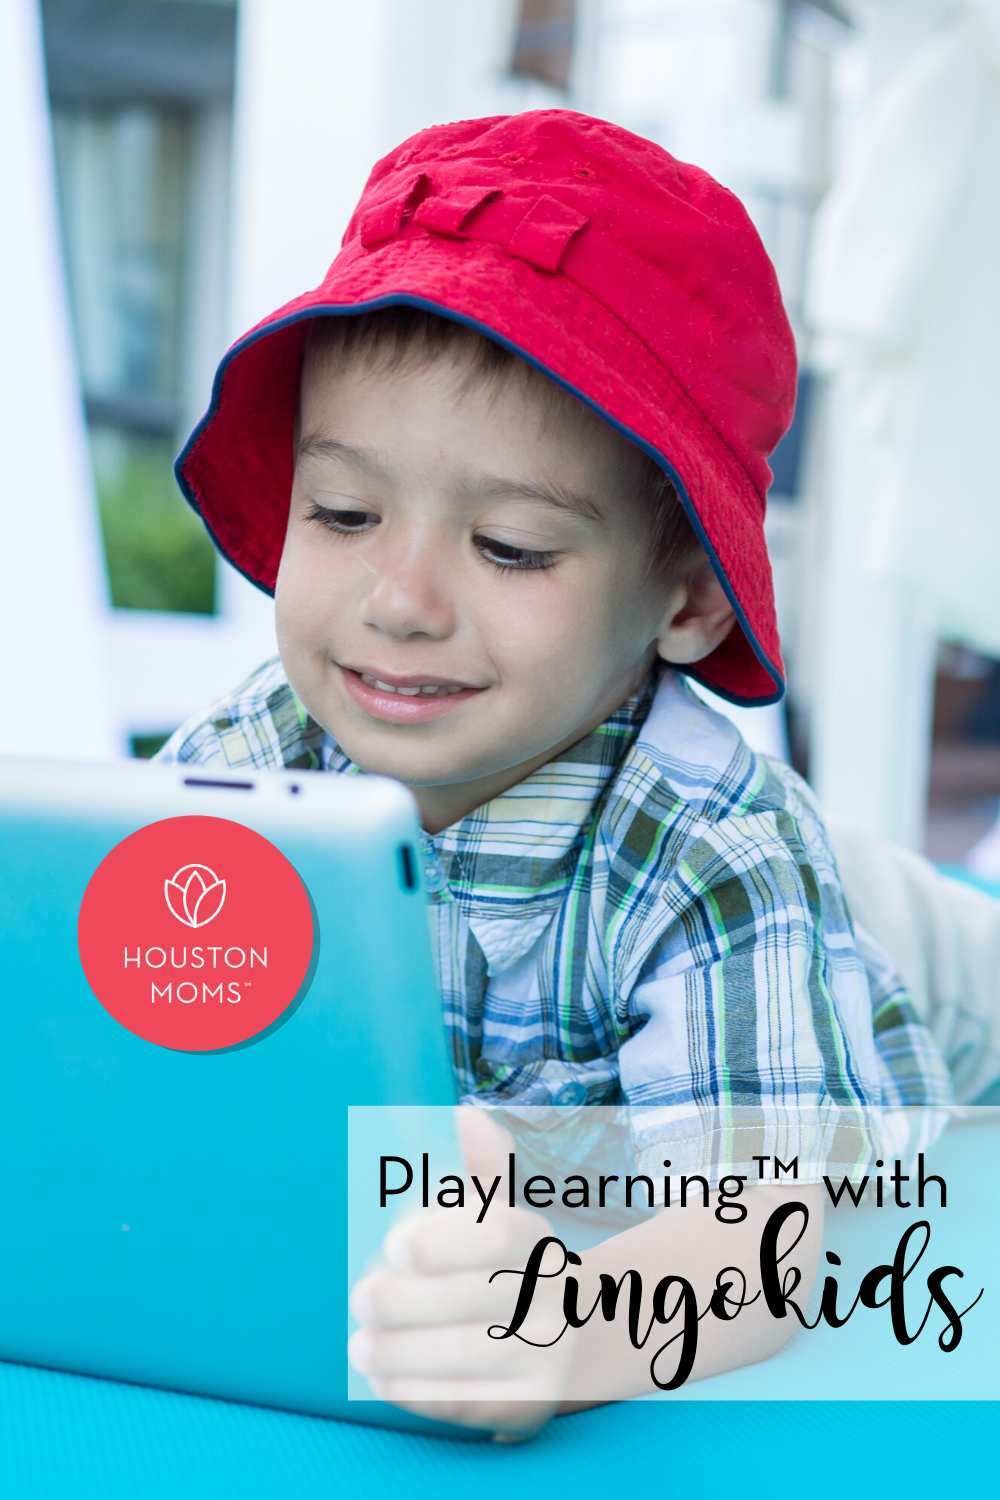 Houston Moms "Playlearning with Lingokids" #houstonmoms #houstonmomsblog #momsaroundhouston